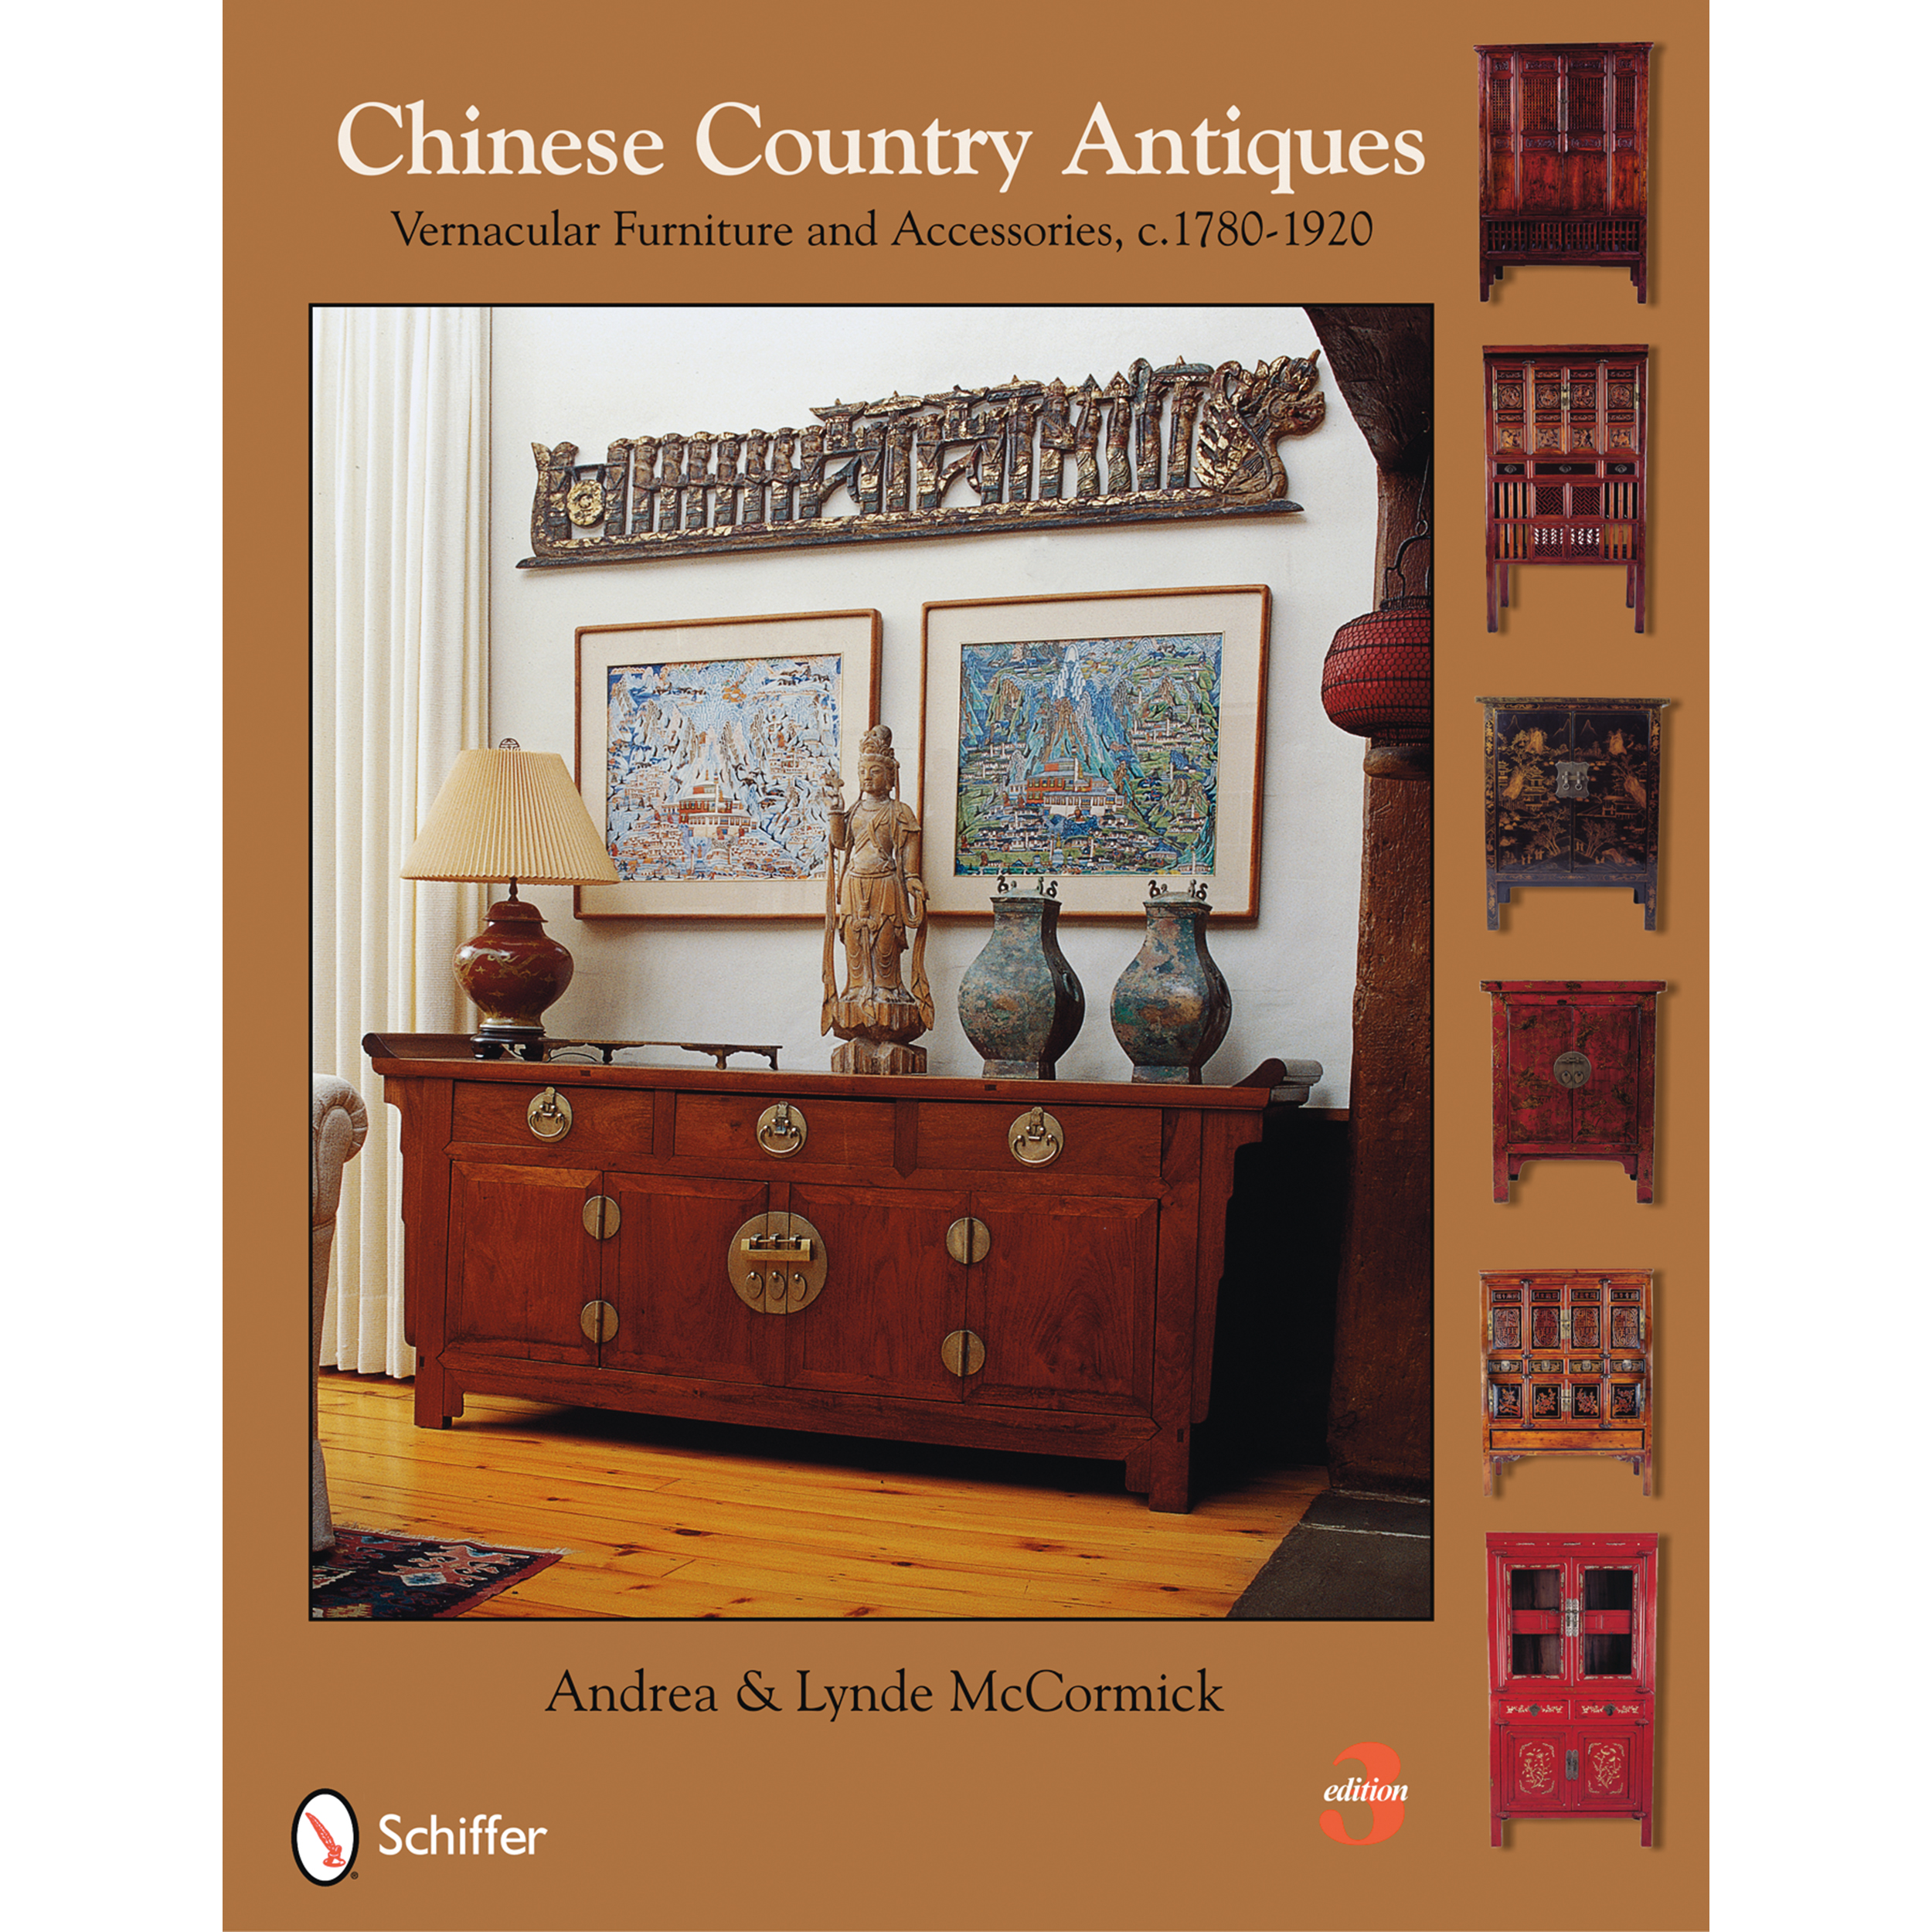 Chinese Country Antiques: Vernacular Furniture And Accessories, C.1780-1920, 3rd Edition